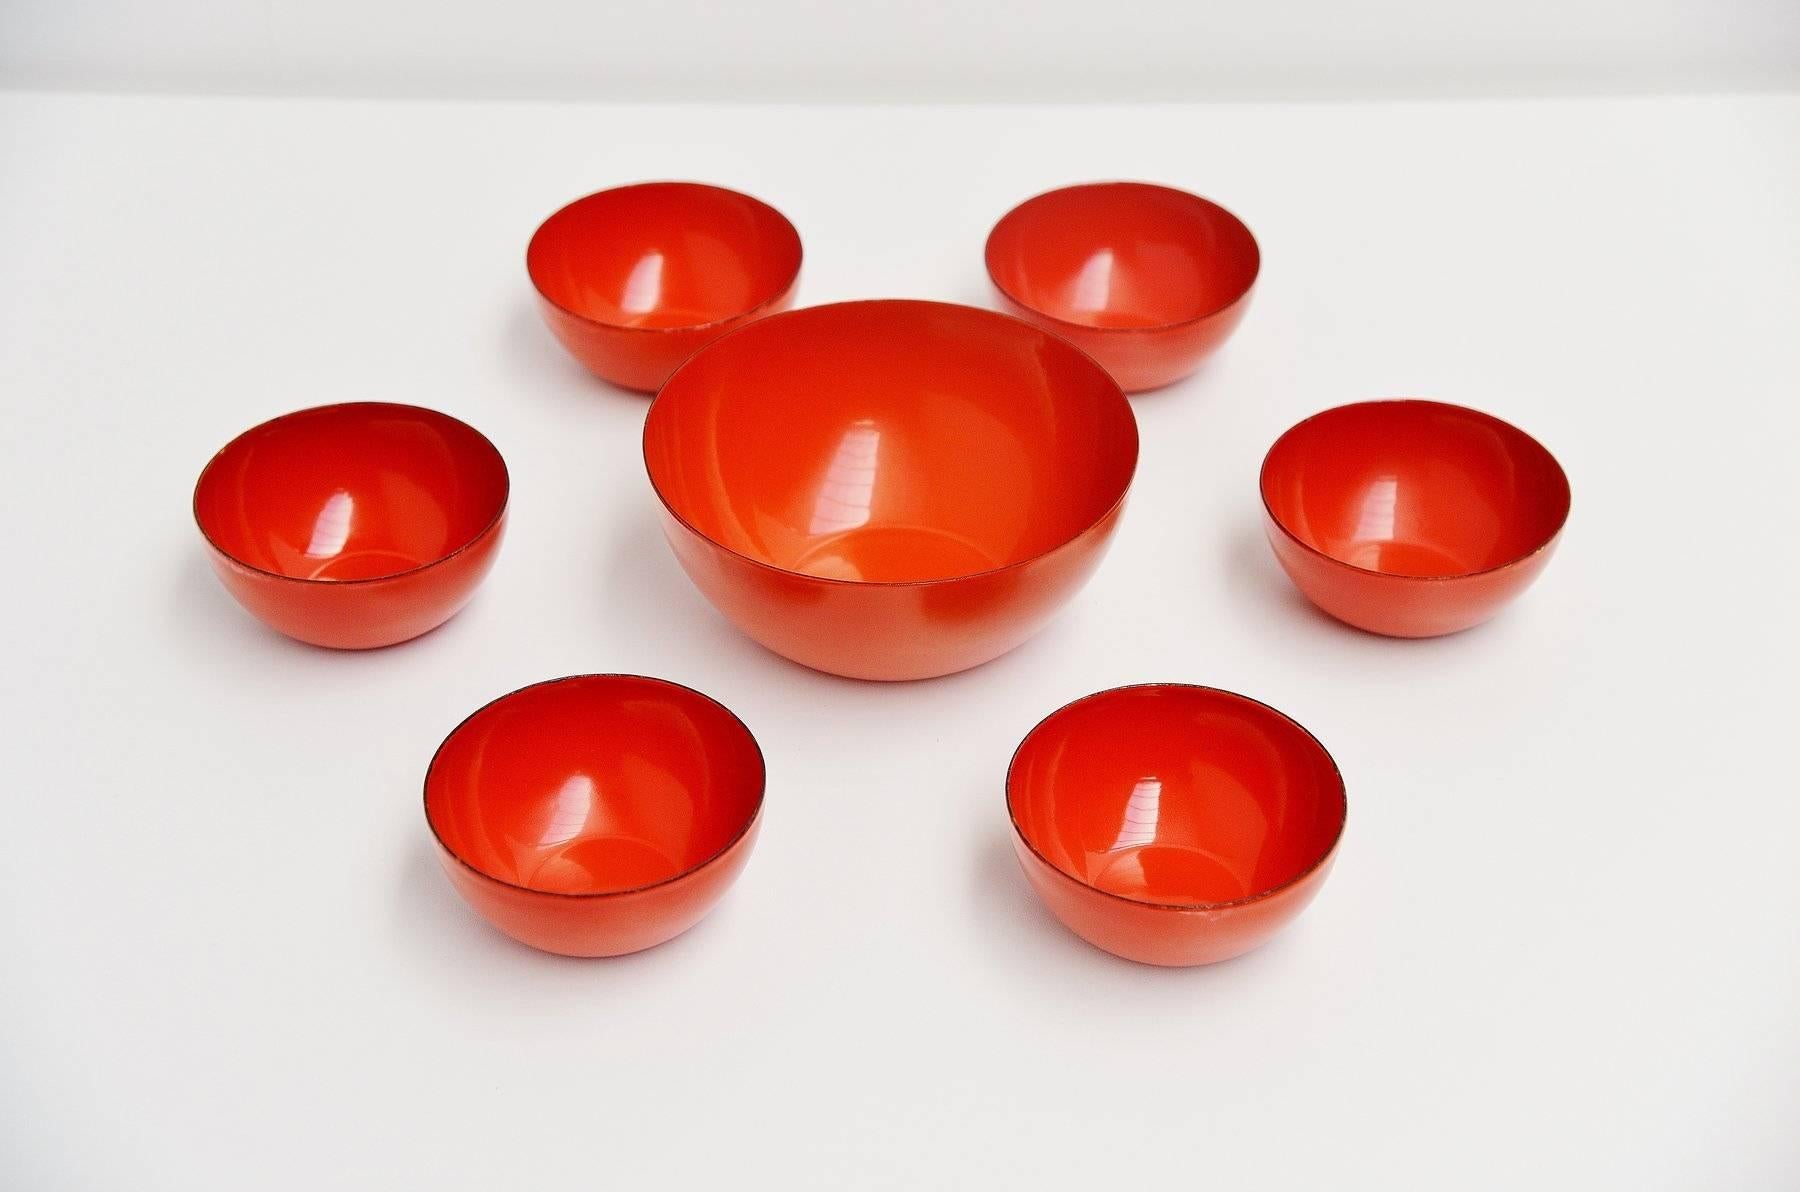 Enameled metal bowls designed by Kaj Franck for Arabia Finel, Finland, 1960. This is for a nice set of seven bowls that could be used as peanut set. One large bowl and six small ones. The bowls are in red enameled steel and the big bowl is signed